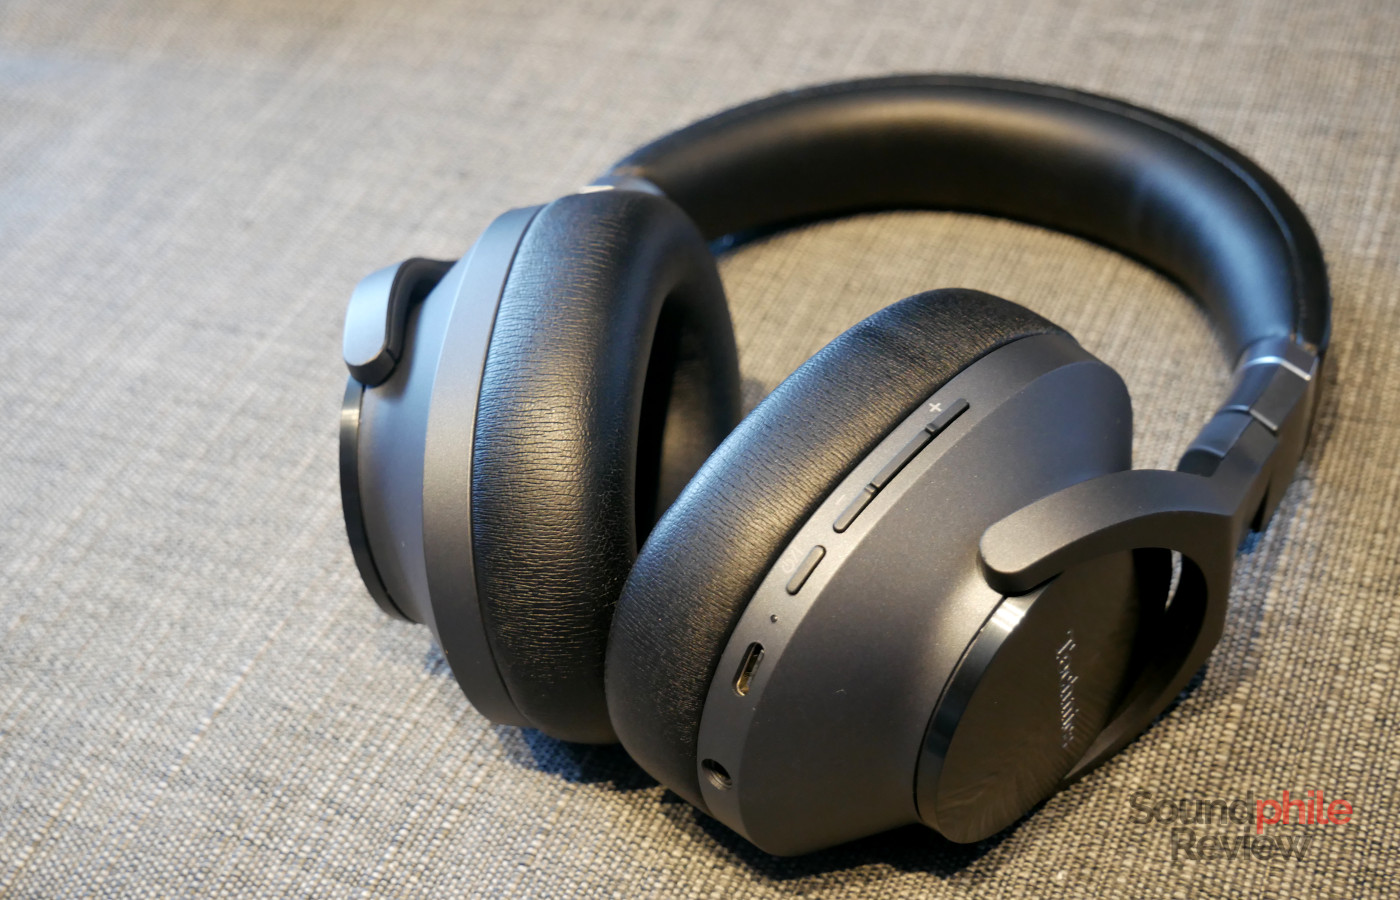 Technics EAH-A800 Review: Great Sound, Battery Life